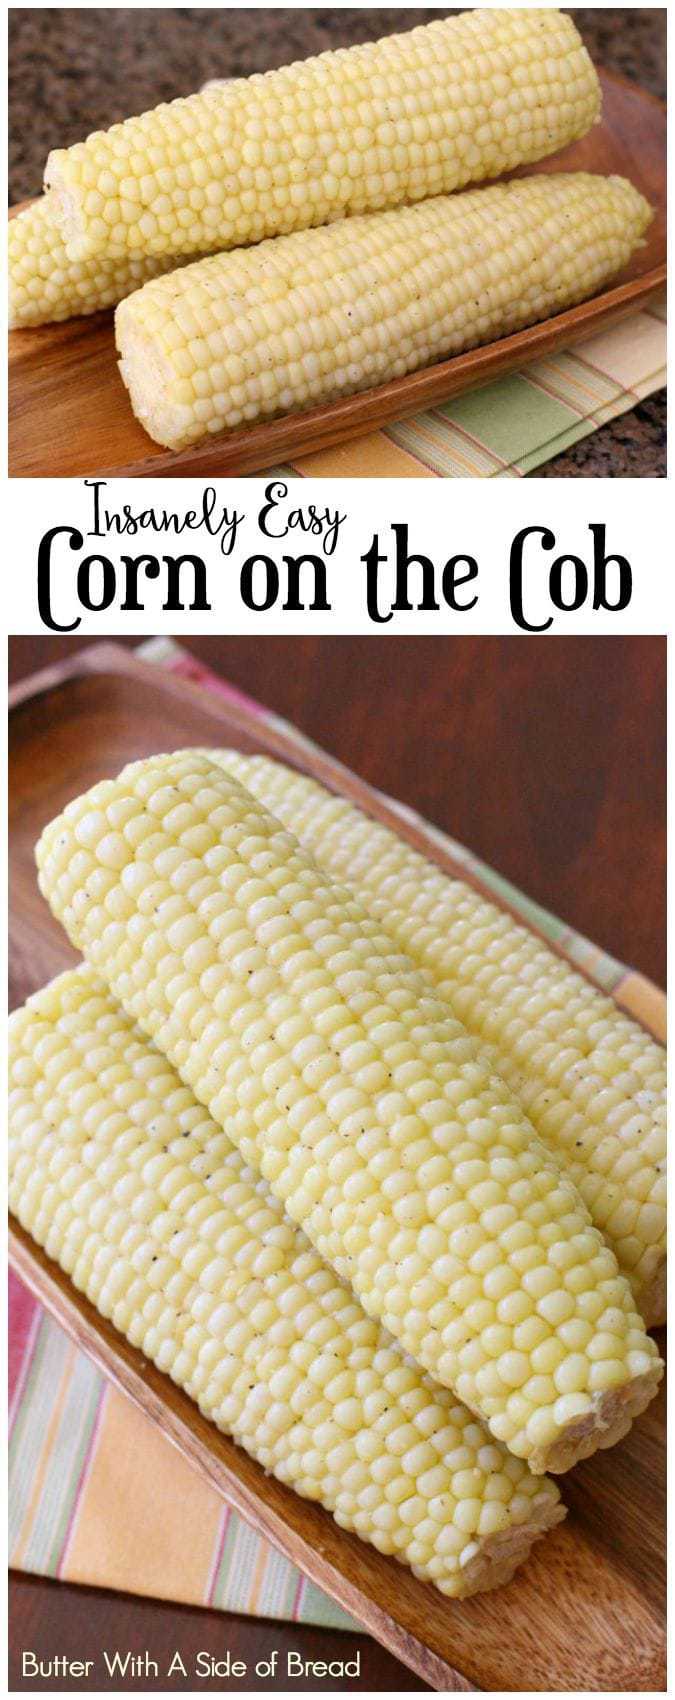 We've been on a corn-on-the-cob kick this summer so I thought I'd share this super simple recipe with you. It's fast, it's easy and everyone loves it. I created a video to show how I've been cooking our corn too- LOVE this method!! It's mess-free and done in no time at all. Enjoy!